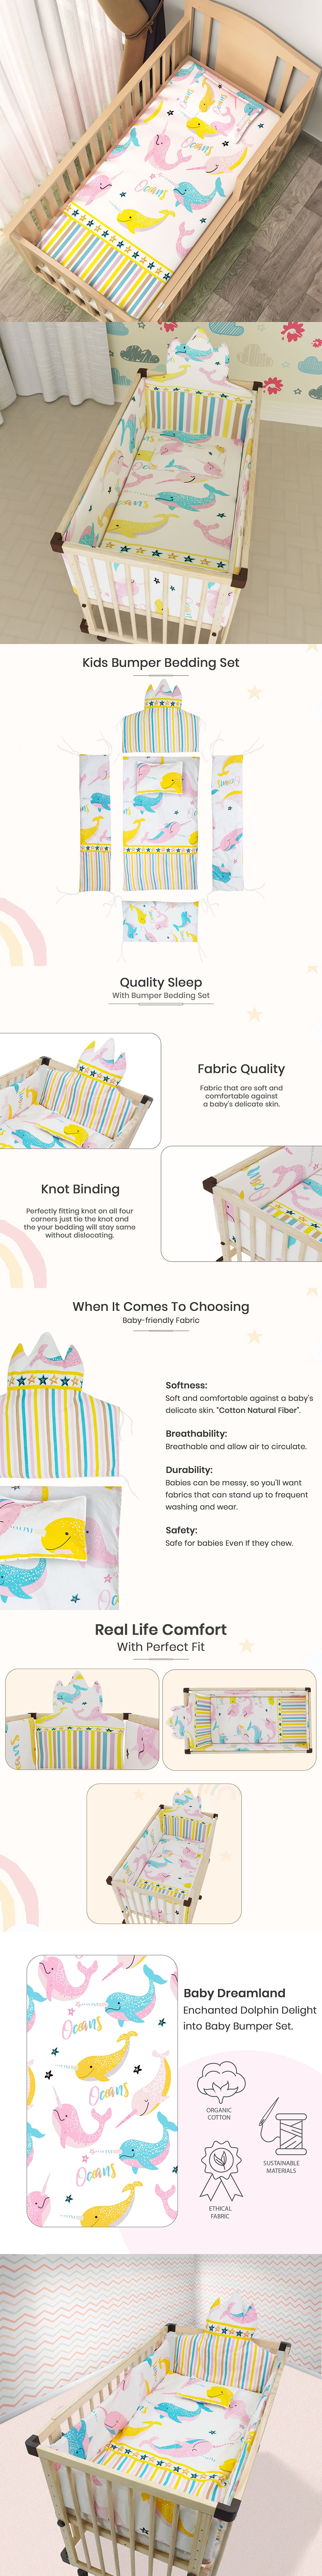 Bumper Set for Baby Wooden Cot